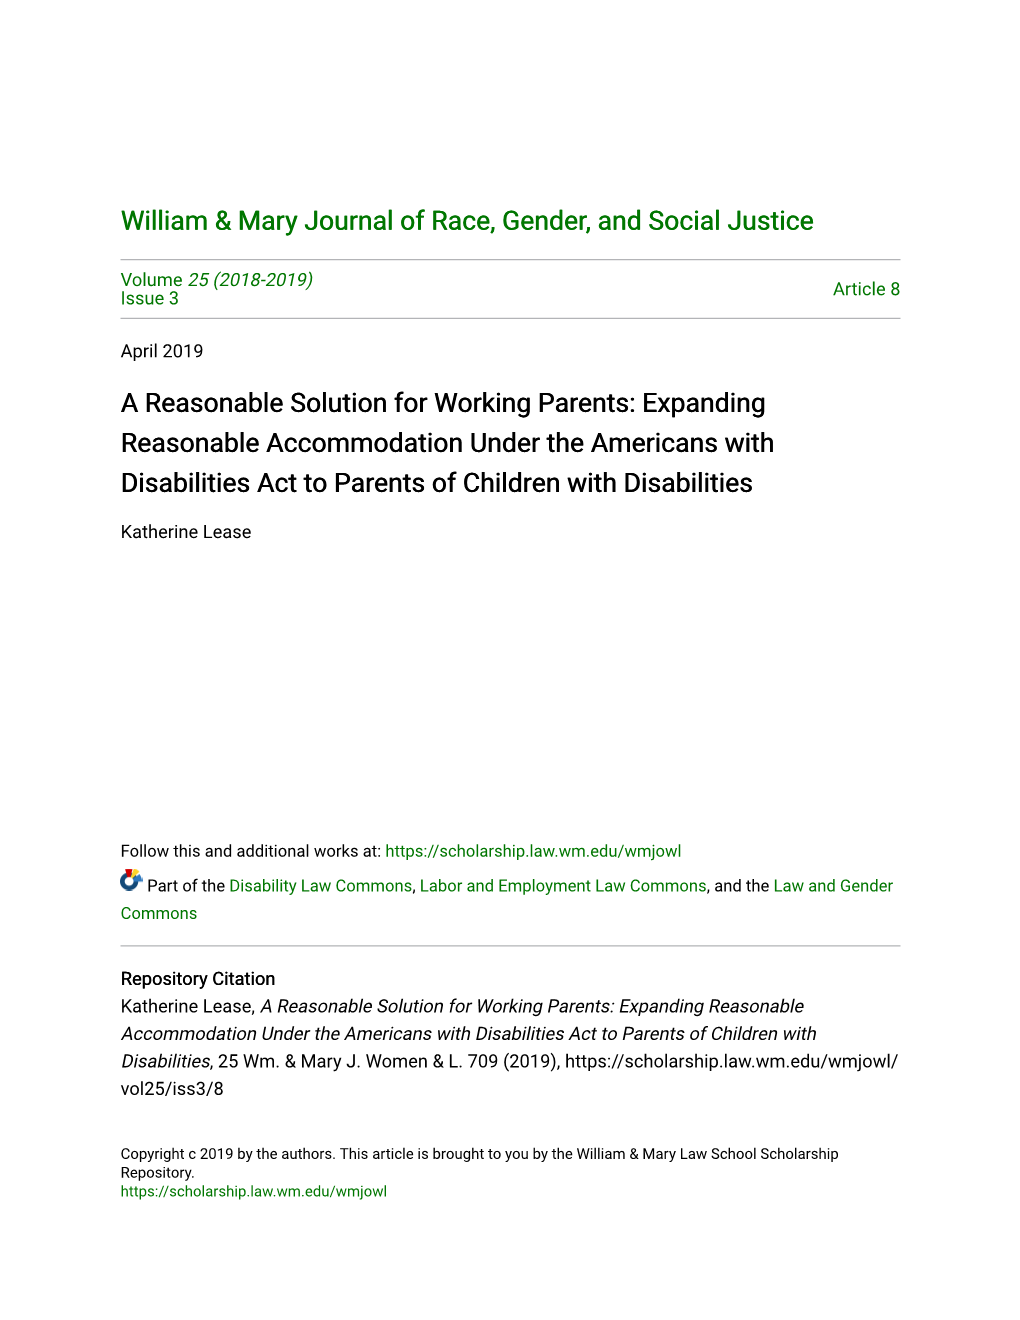 A Reasonable Solution for Working Parents: Expanding Reasonable Accommodation Under the Americans with Disabilities Act to Parents of Children with Disabilities